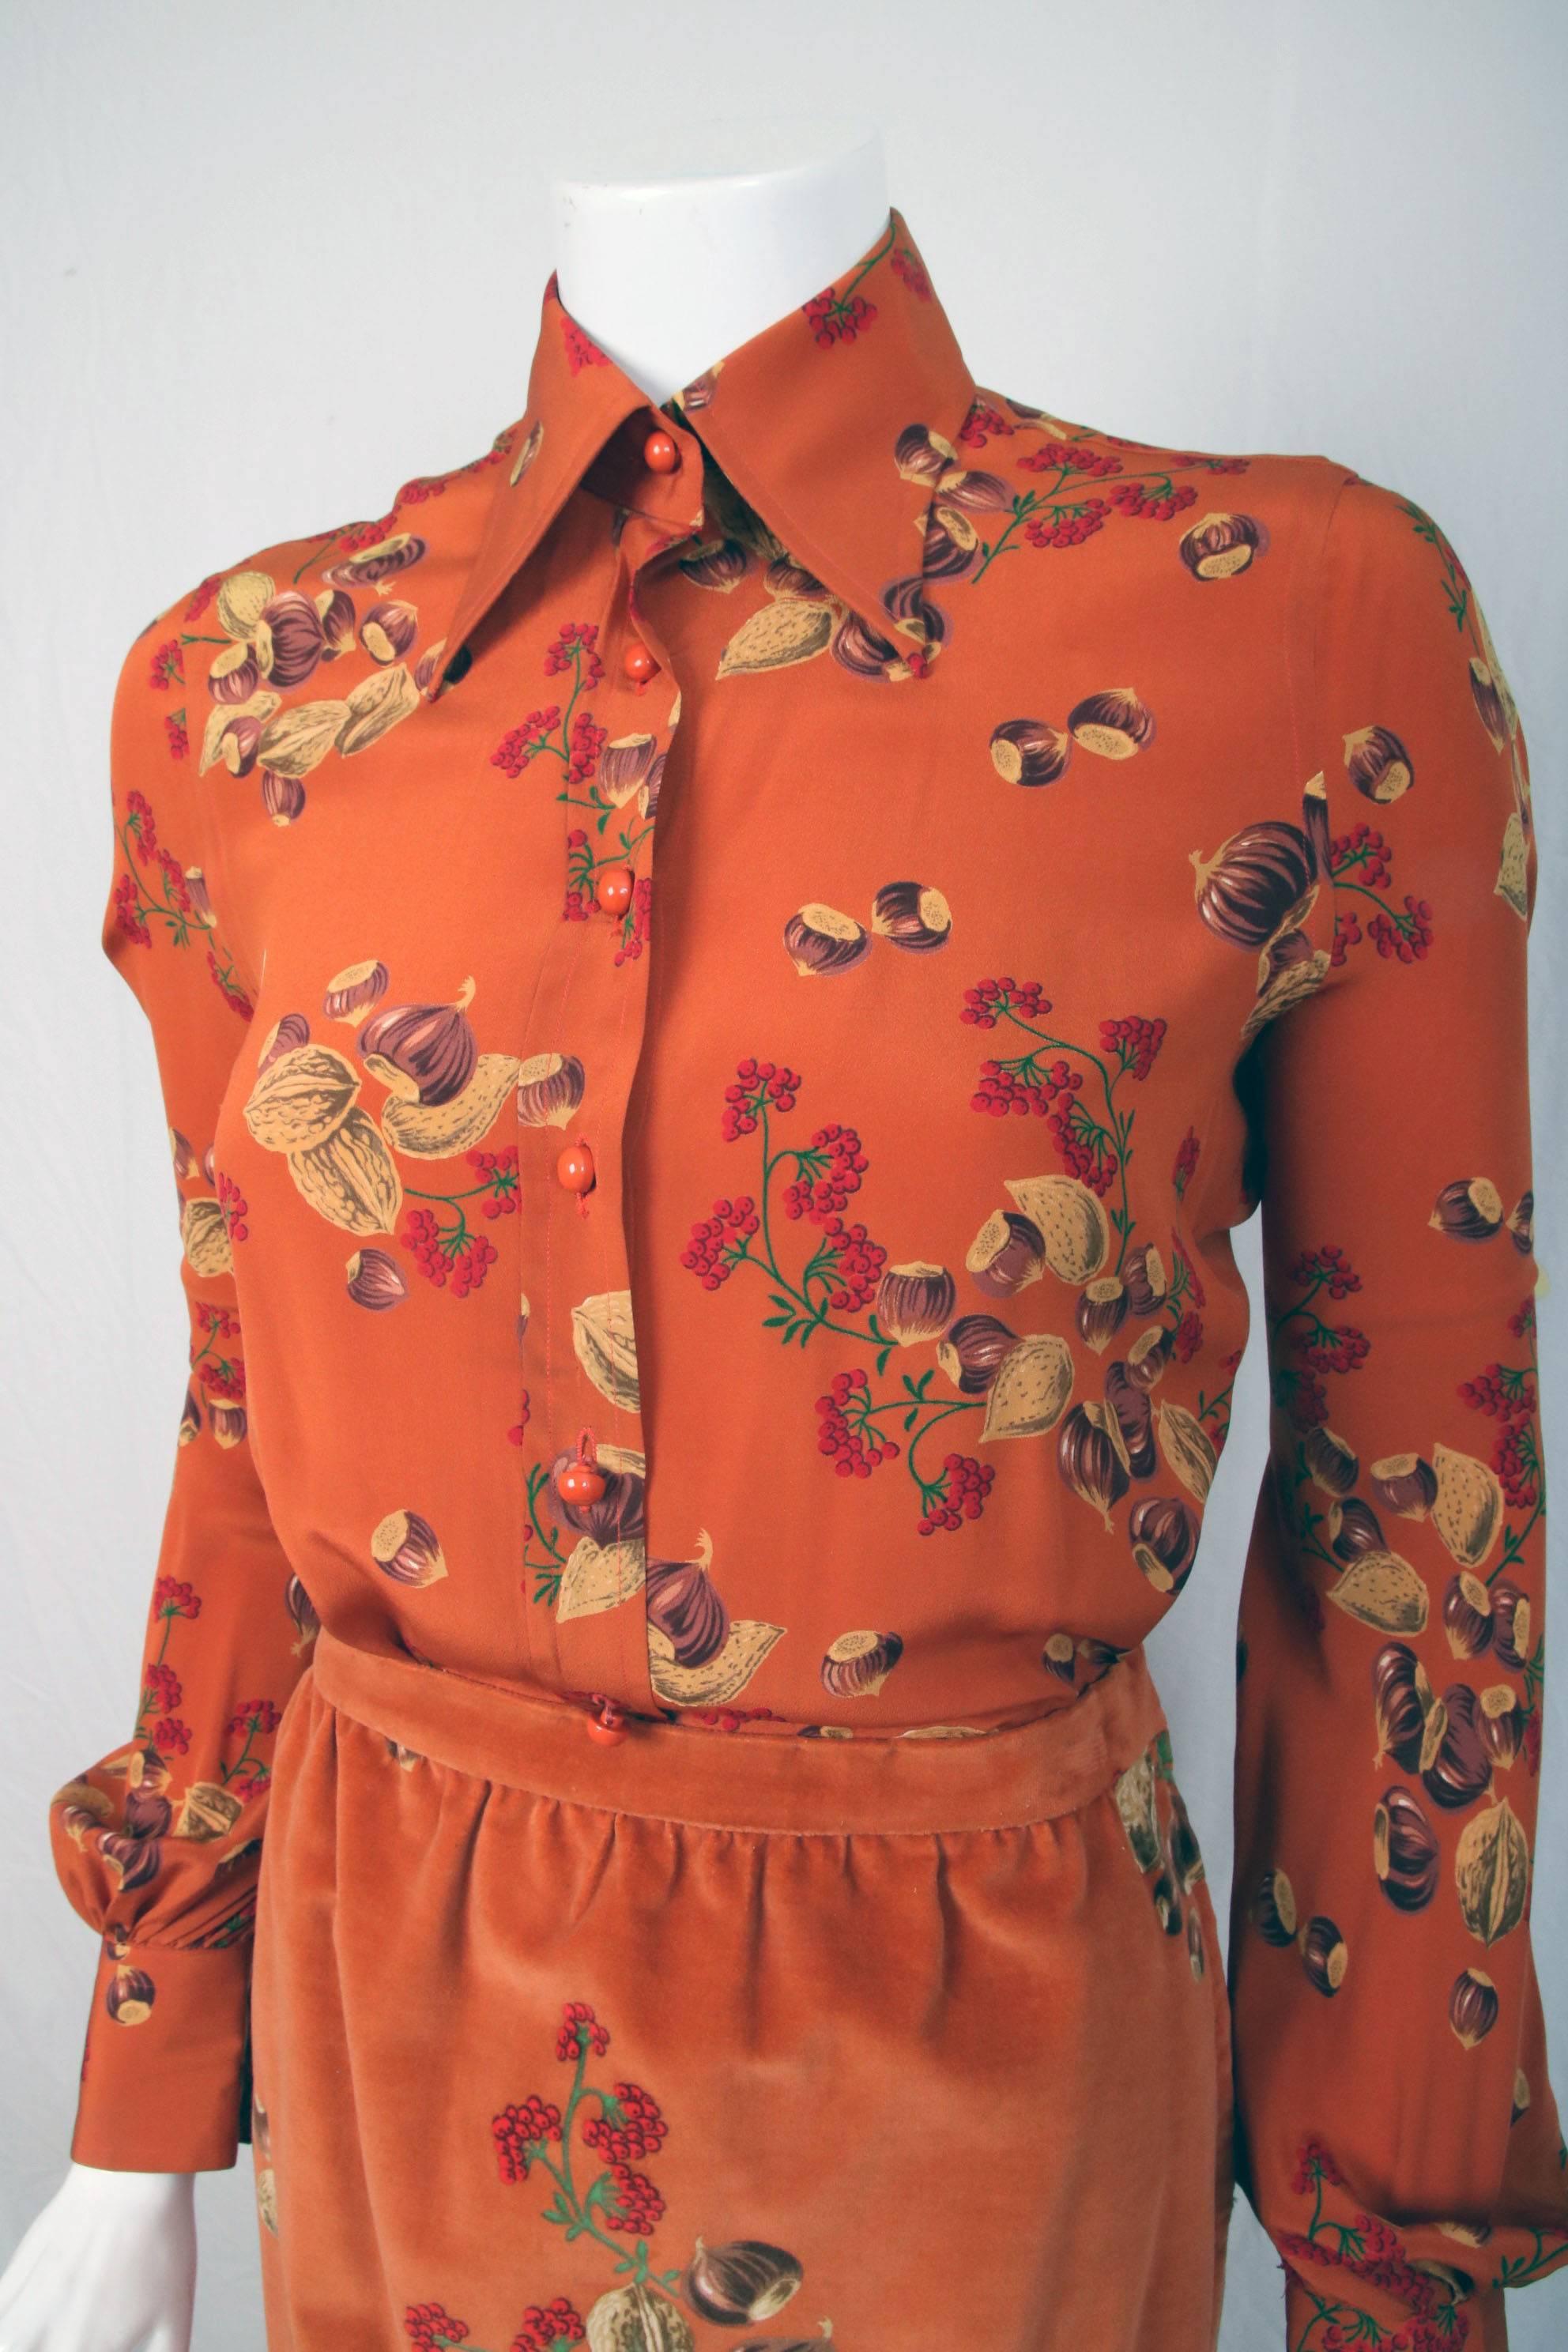 1970's Valentino iconic and rare "acorn print" ensemble comprised of a velvet maxi skirt and 100% silk button up blouse in burnt orange. The skirt has a zip and hook closure. This set is complete with head scarf done in the same print. In